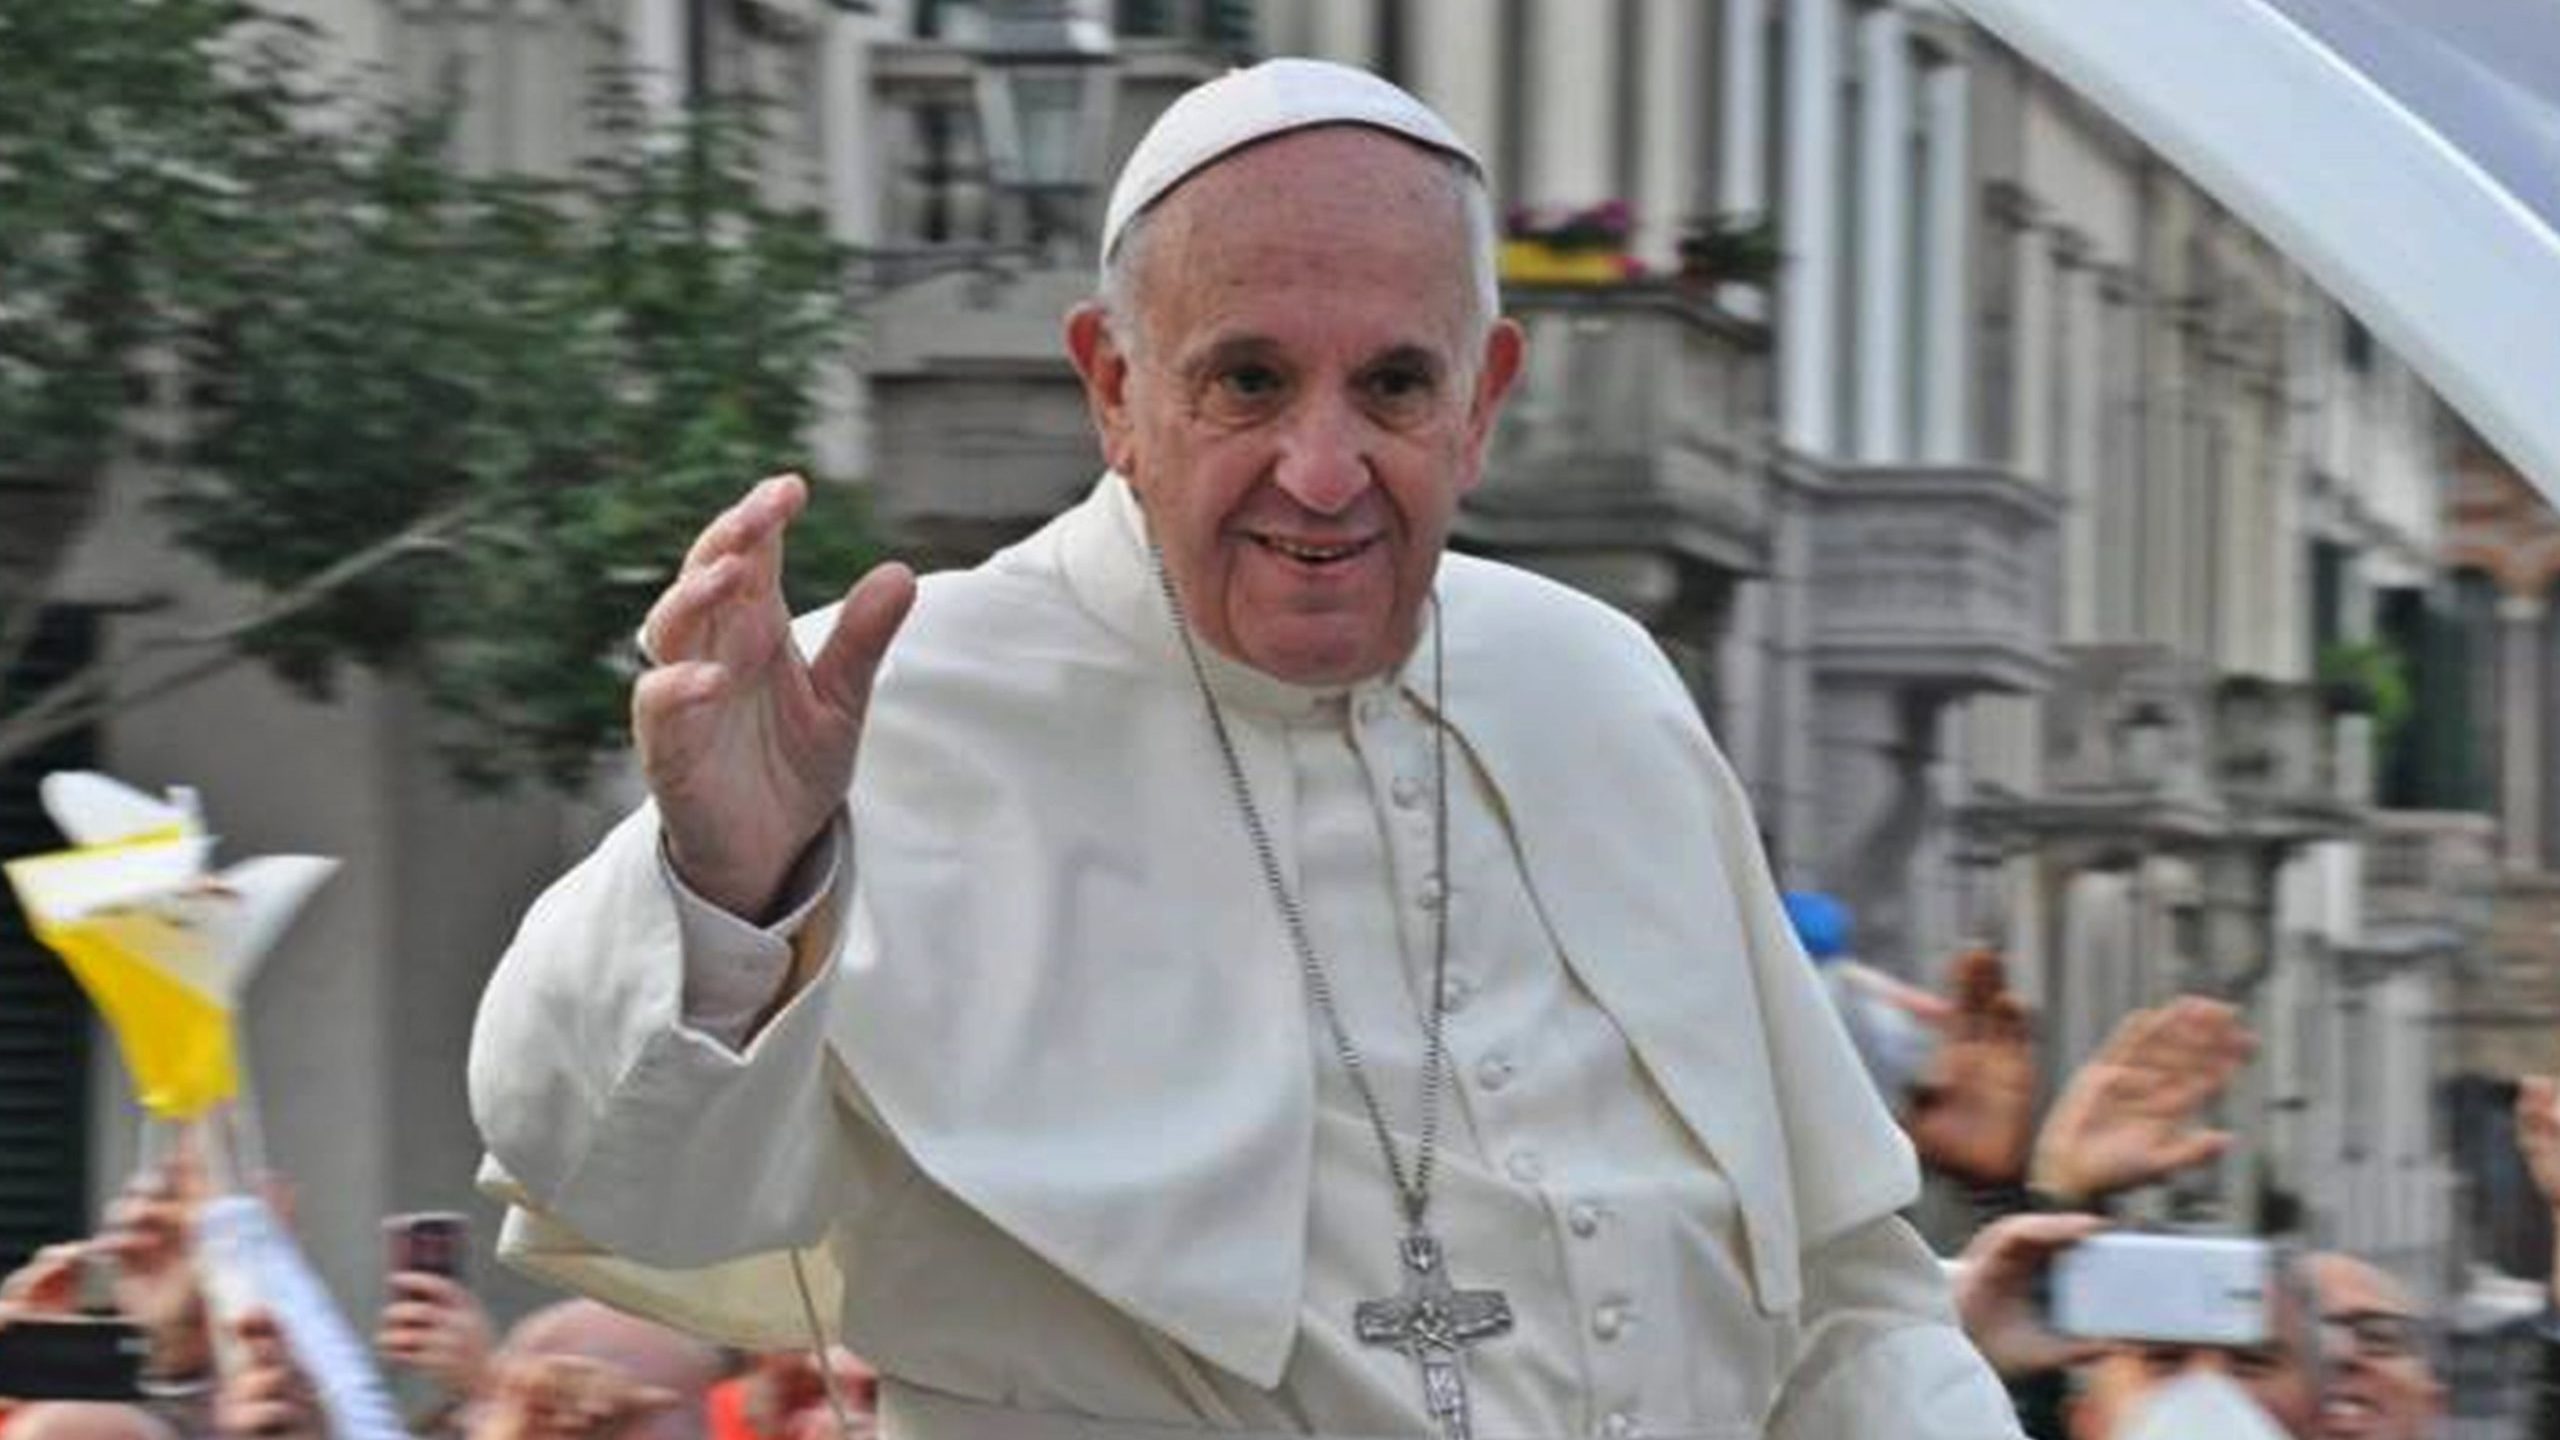 Pope Francis and the Embodiment of Human Fraternity